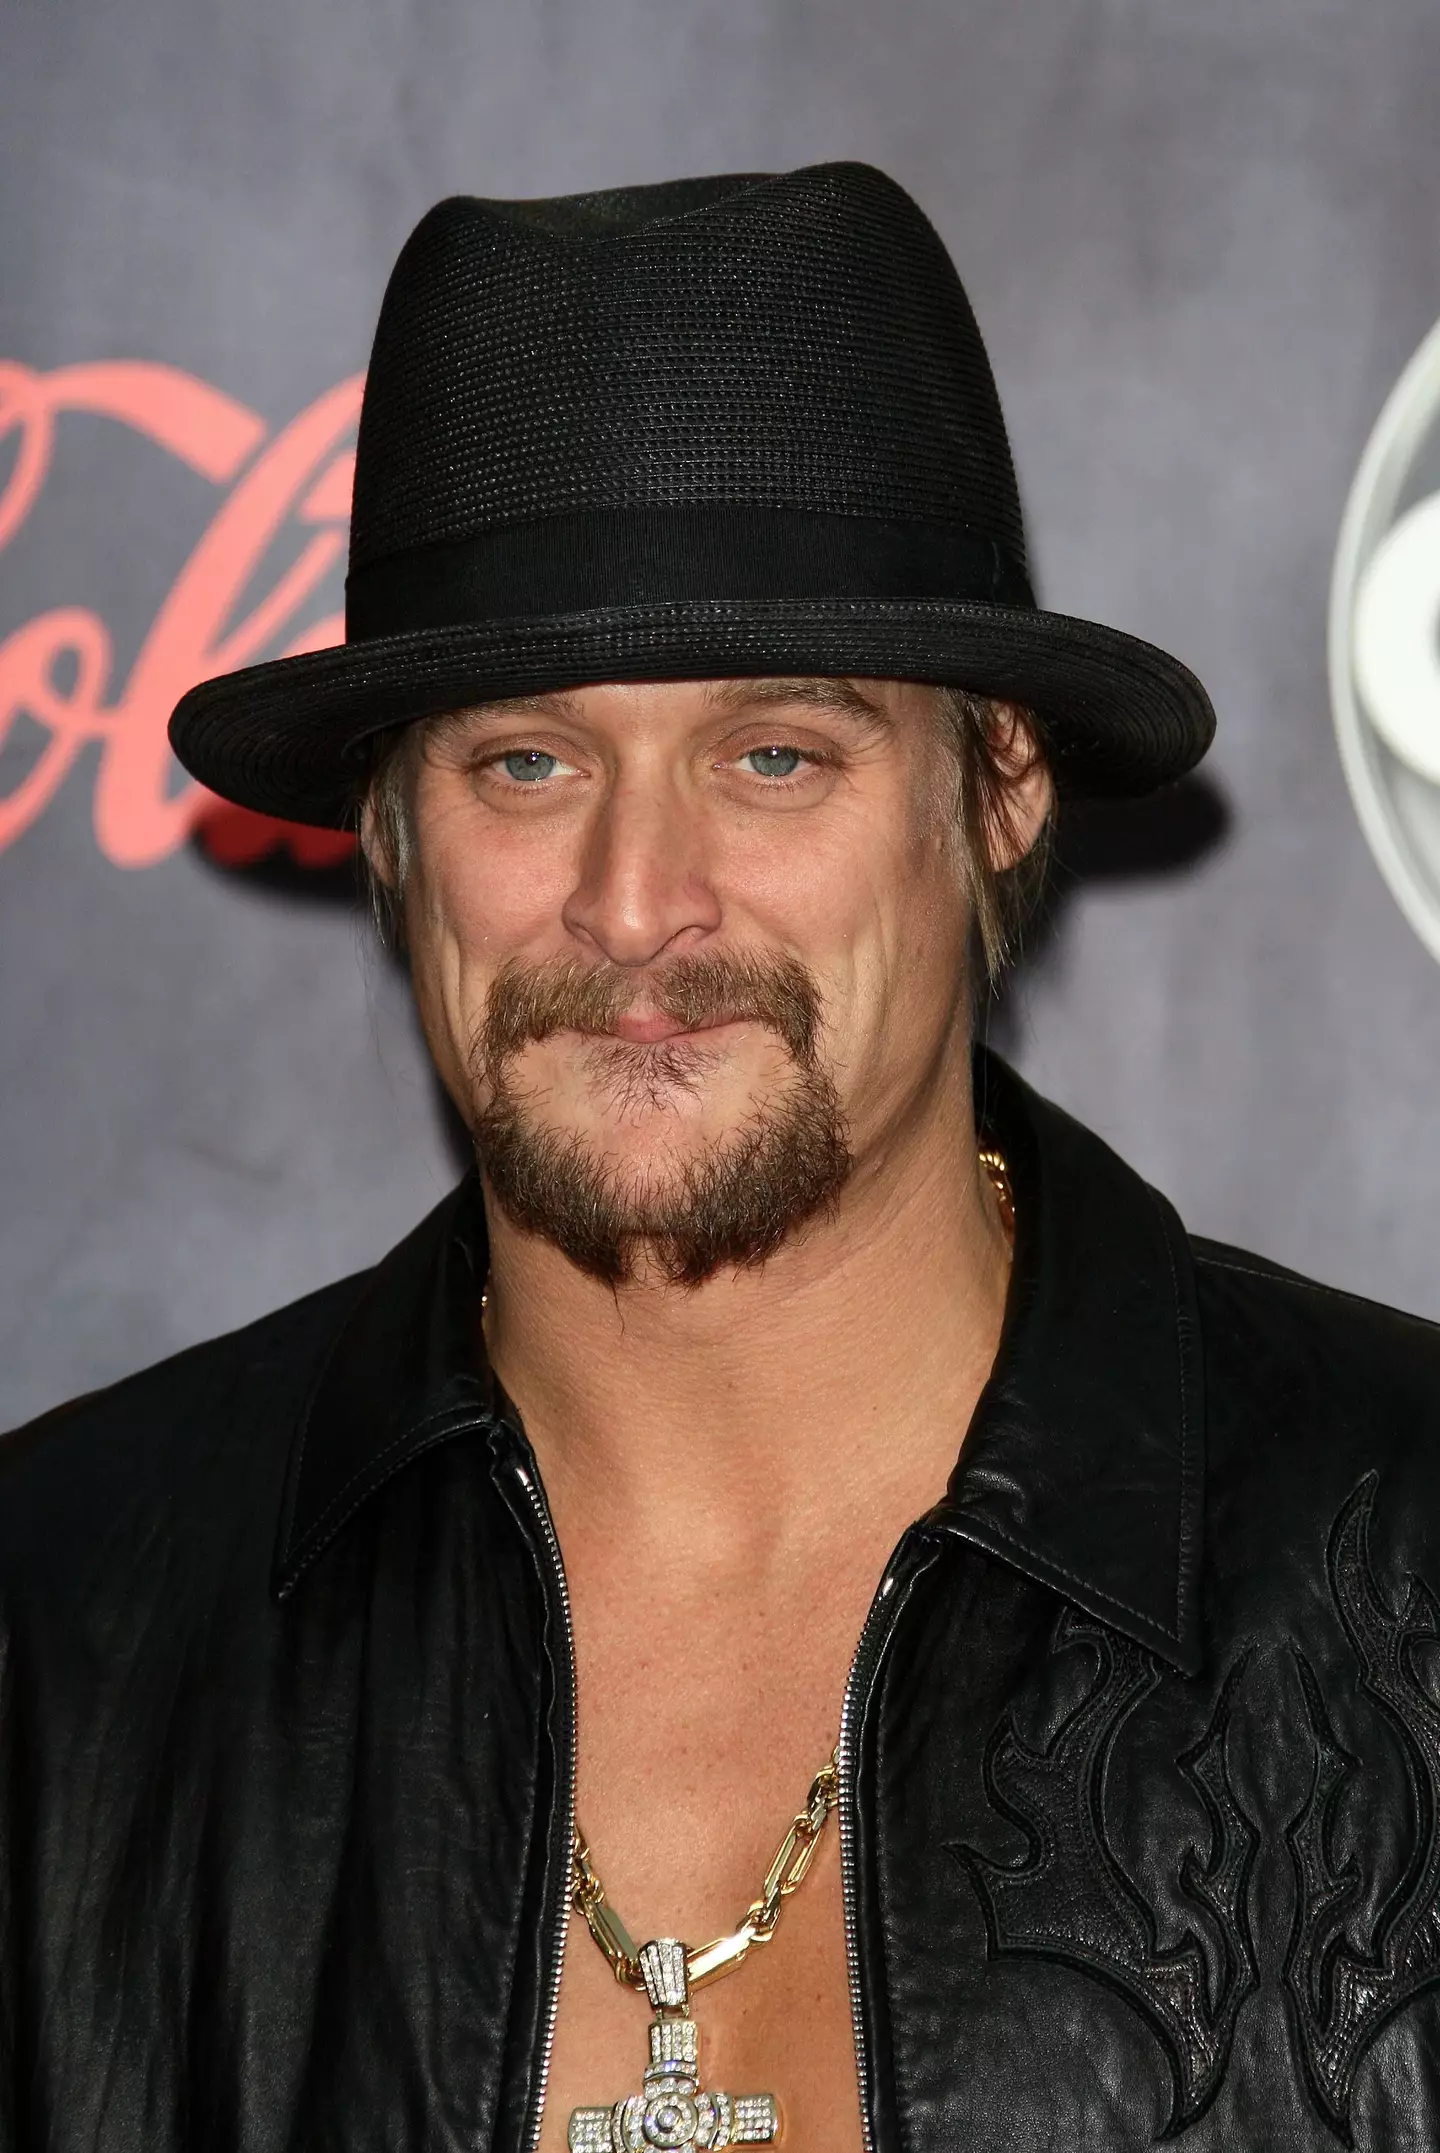 Kid Rock is known for his controversial beliefs.